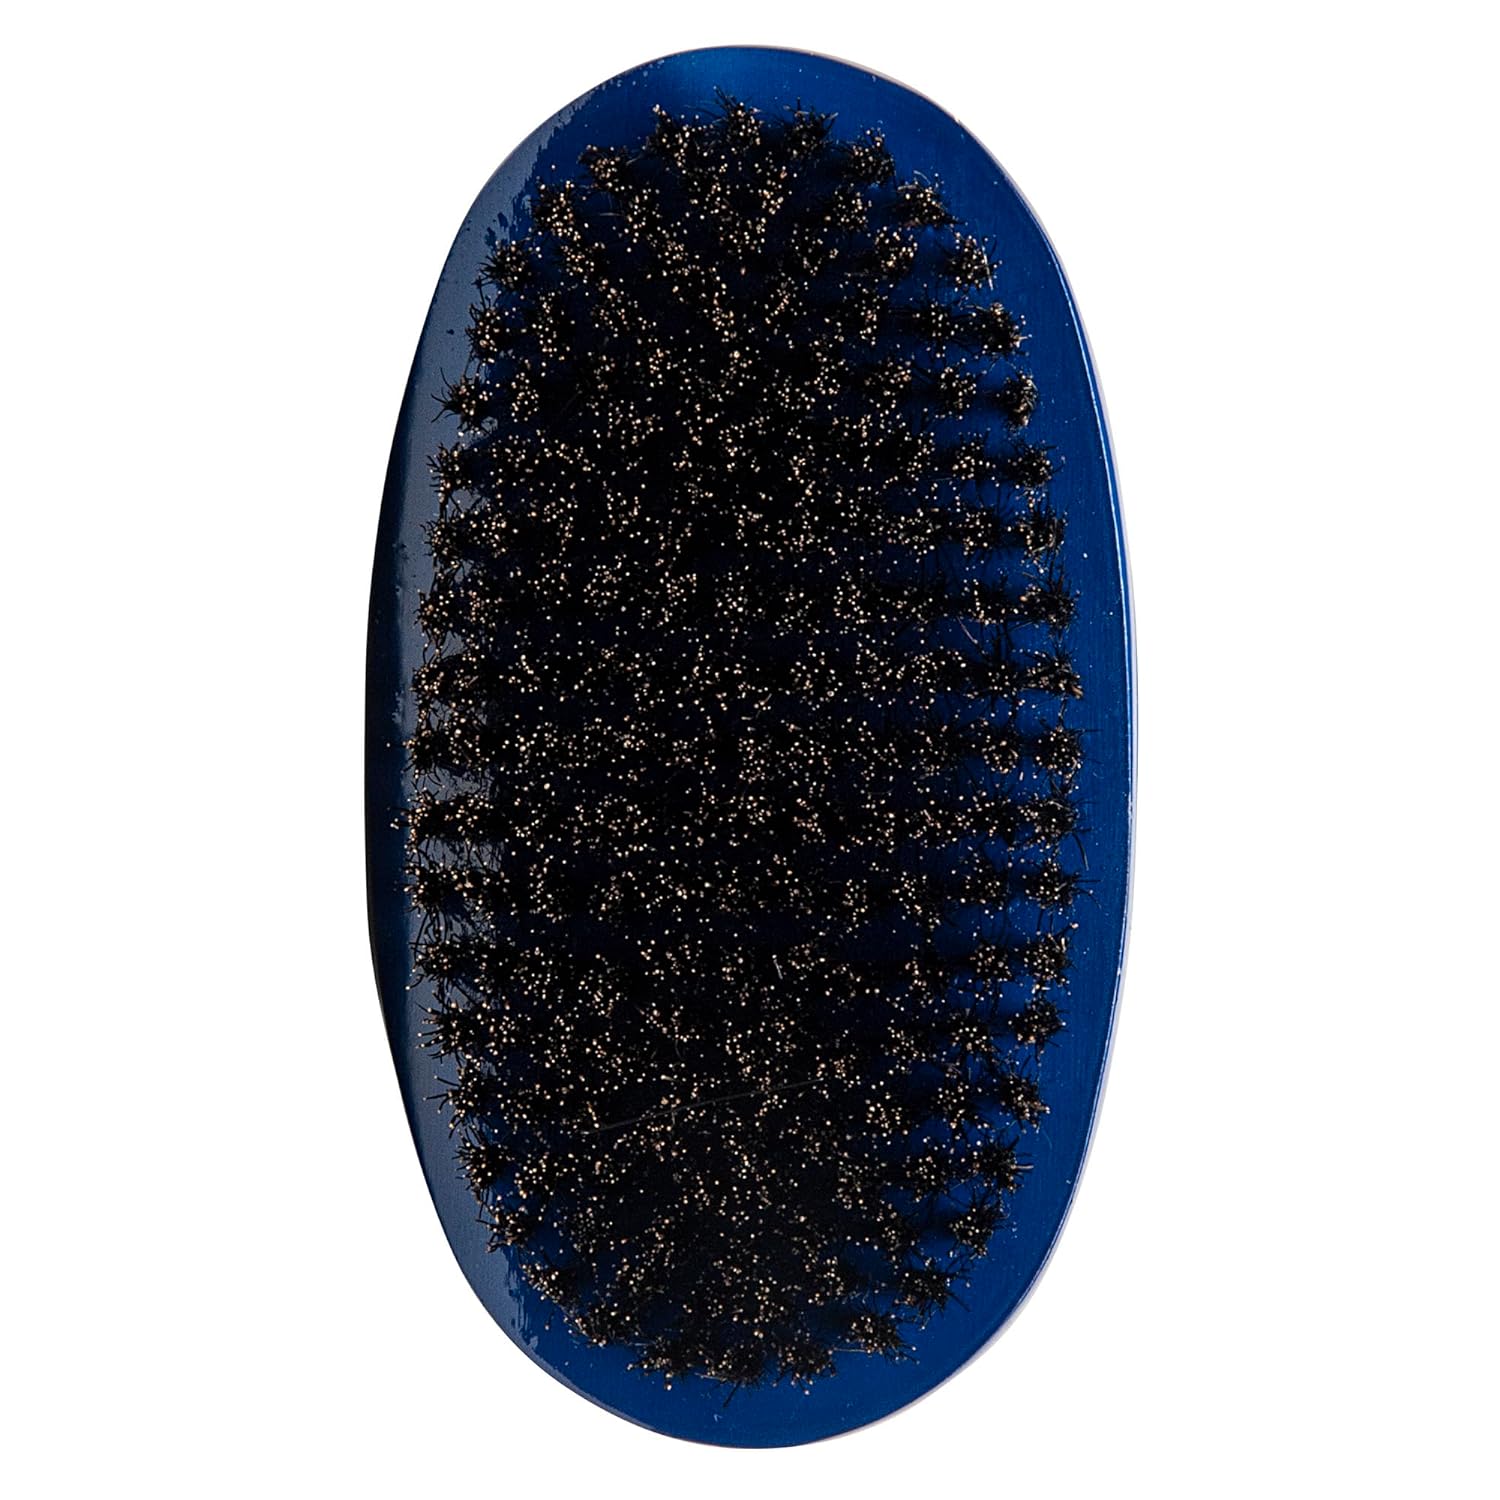 Diane Prestige 100% Boar Bristle Curved Military Wave Brush for Men and Barbers – Medium Bristles for Thick to Curly Hair – Use for Detangling, Smoothing, Wave Styles, Gentle on Scalp, Gives Shine